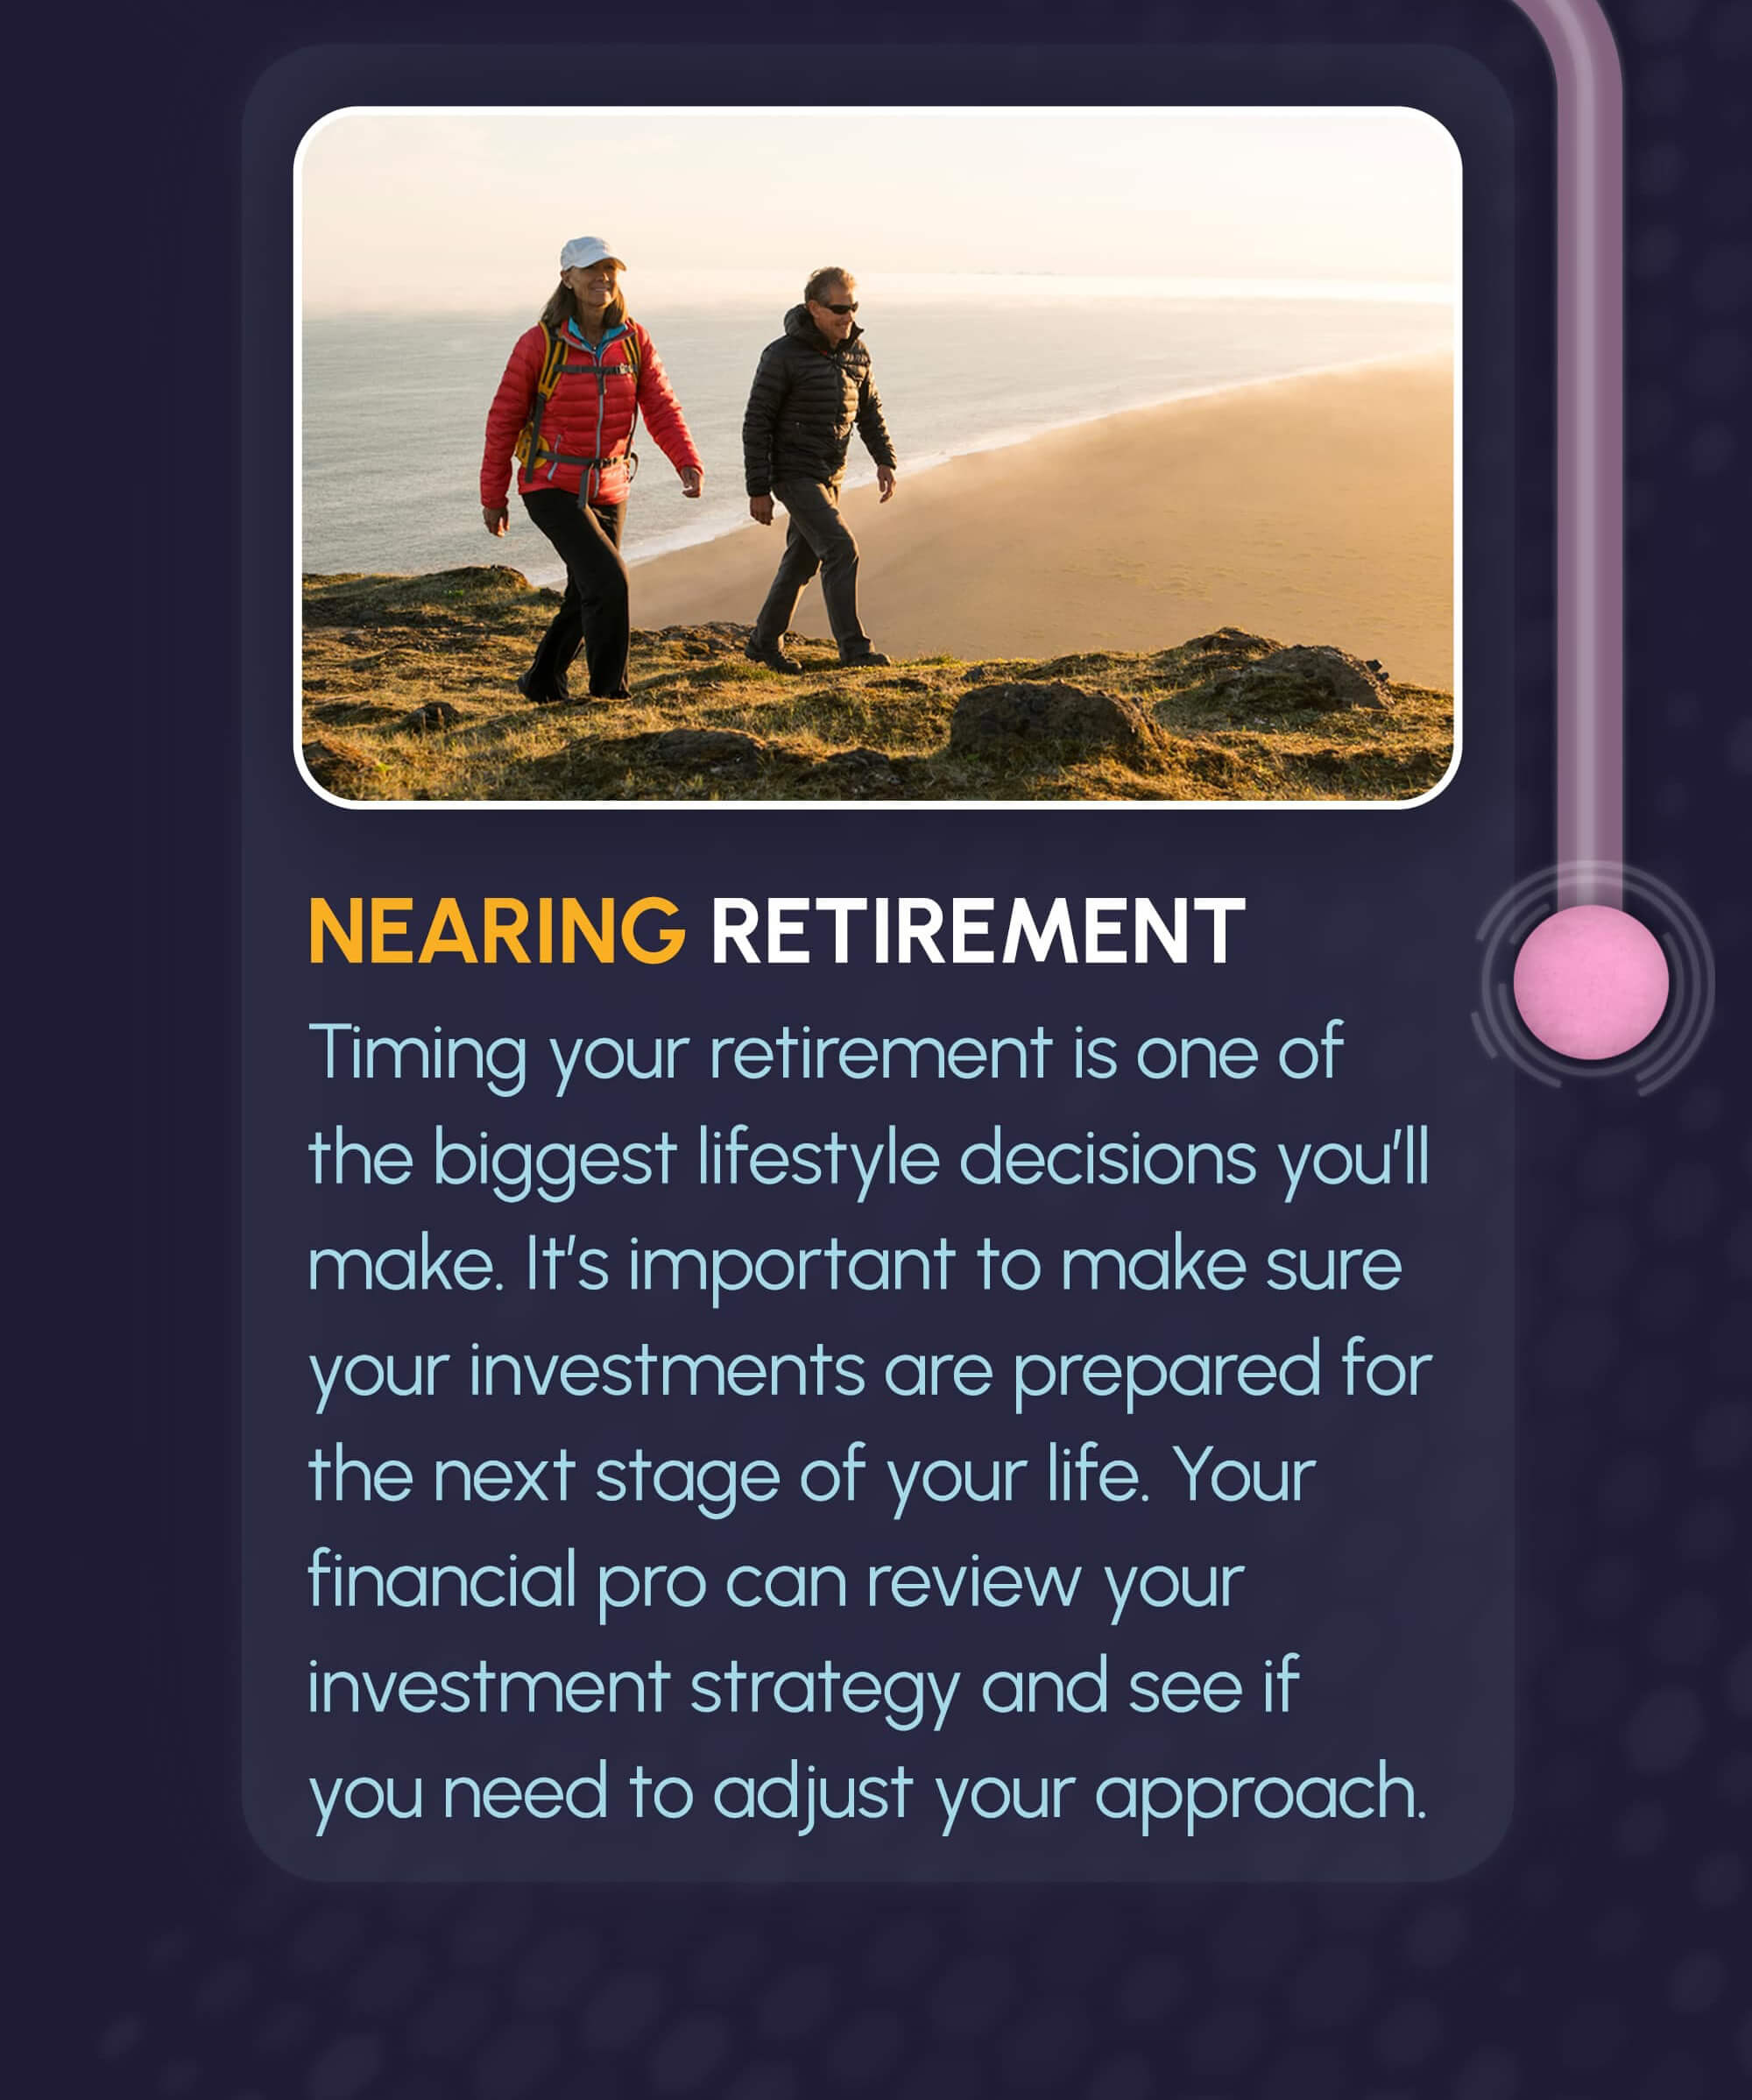 The path from the labyrinth goes down to the fourth and final image and text. The image shows a woman and a man hiking on a green cliff overlooking a beach and the ocean. The title underneath reads, Nearing Retirement. The text underneath reads: Timing your retirement is one of the biggest lifestyle decisions you’ll make. It’s important to make sure your investments are prepared for the next stage of your life. Your financial pro can review your investment strategy and see if you need to adjust your approach.